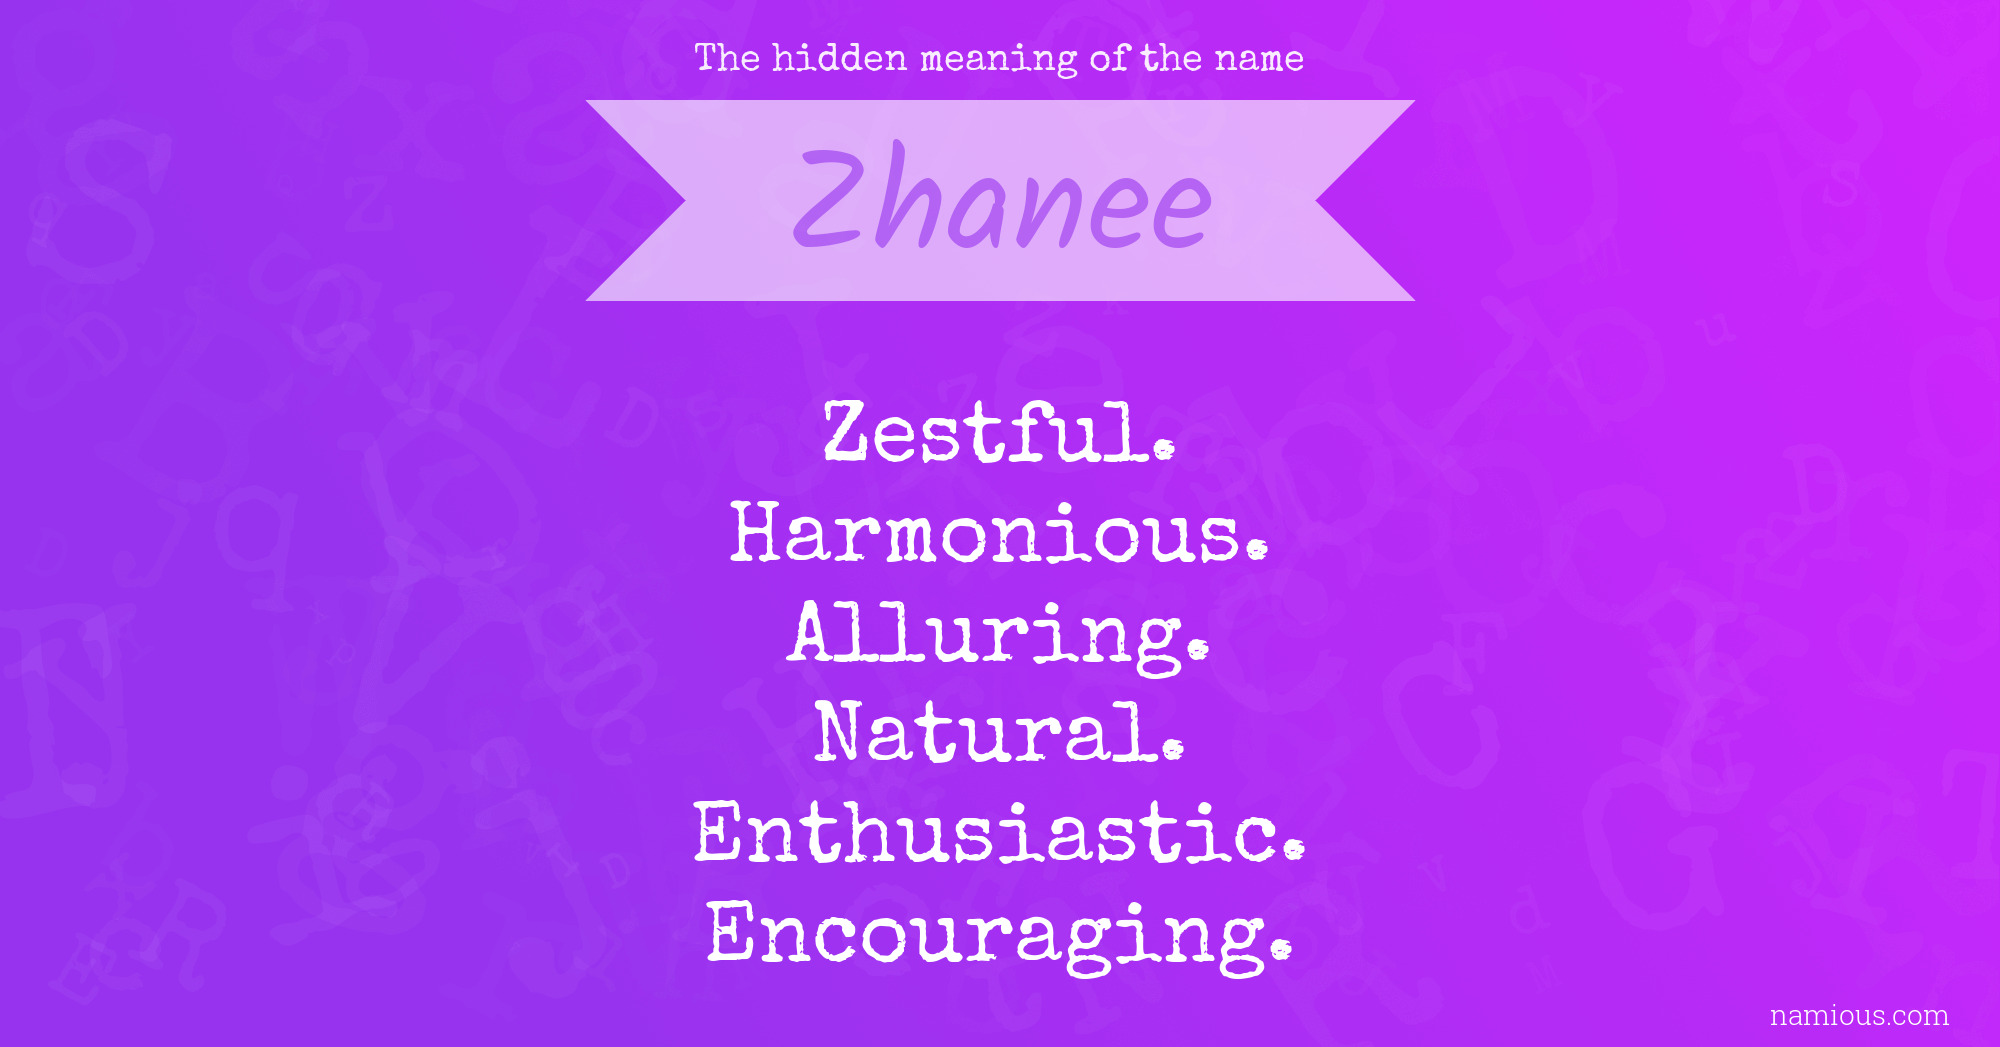 The hidden meaning of the name Zhanee